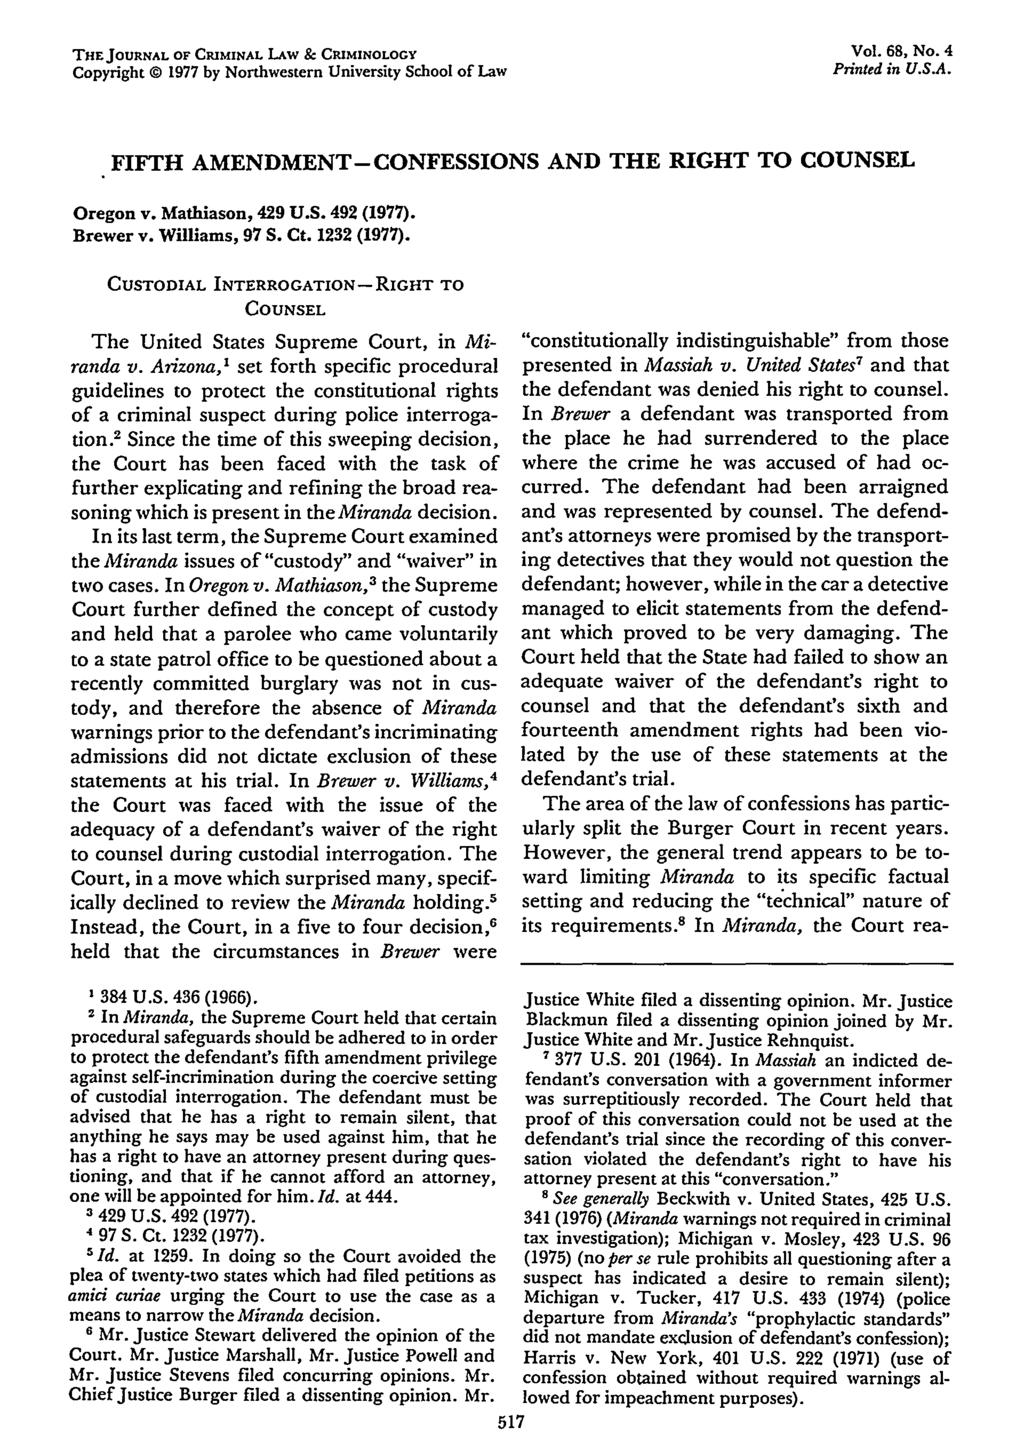 THE JOURNAL OF CRIMINAL LAW & CRIMINOLOGY Copyright 1977 by Northwestern University School of Law Vol. 68, No. 4 Printed in U.S.A. FIFTH AMENDMENT-CONFESSIONS AND THE RIGHT TO COUNSEL Oregon v.